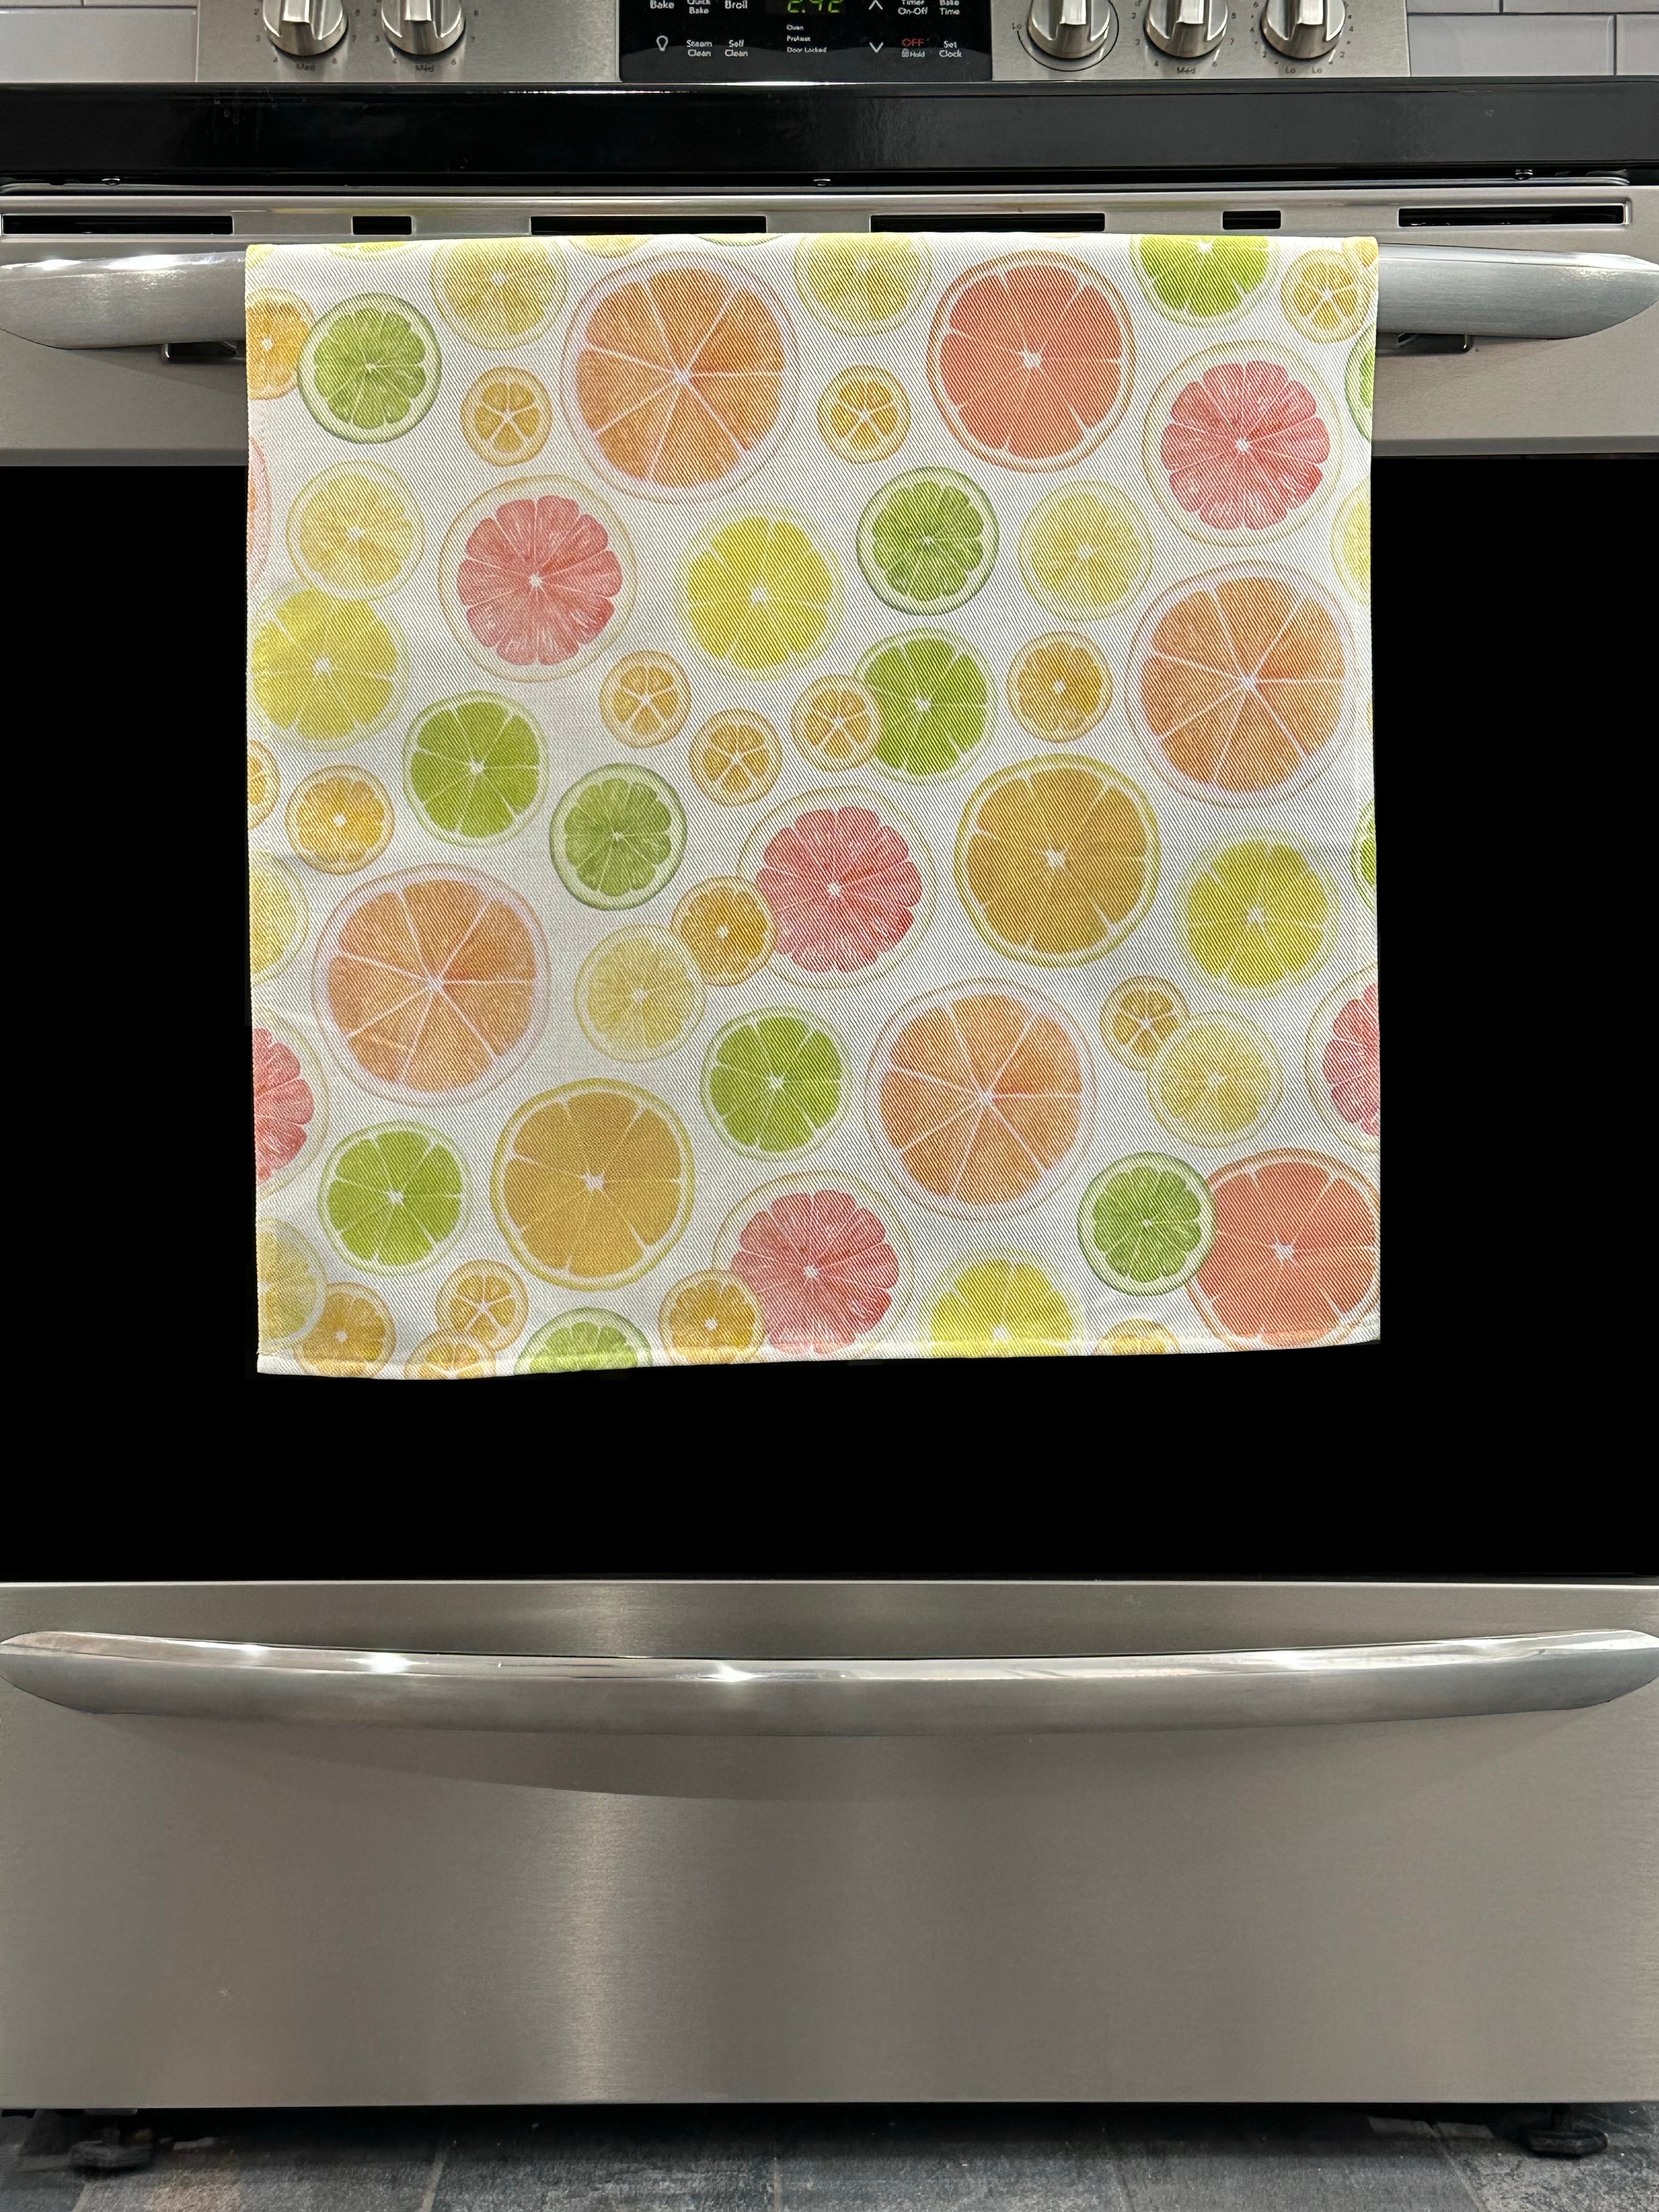 Kitchen Towel featuring a multicolor citrus fruit design. Pictured here hanging on a stove.